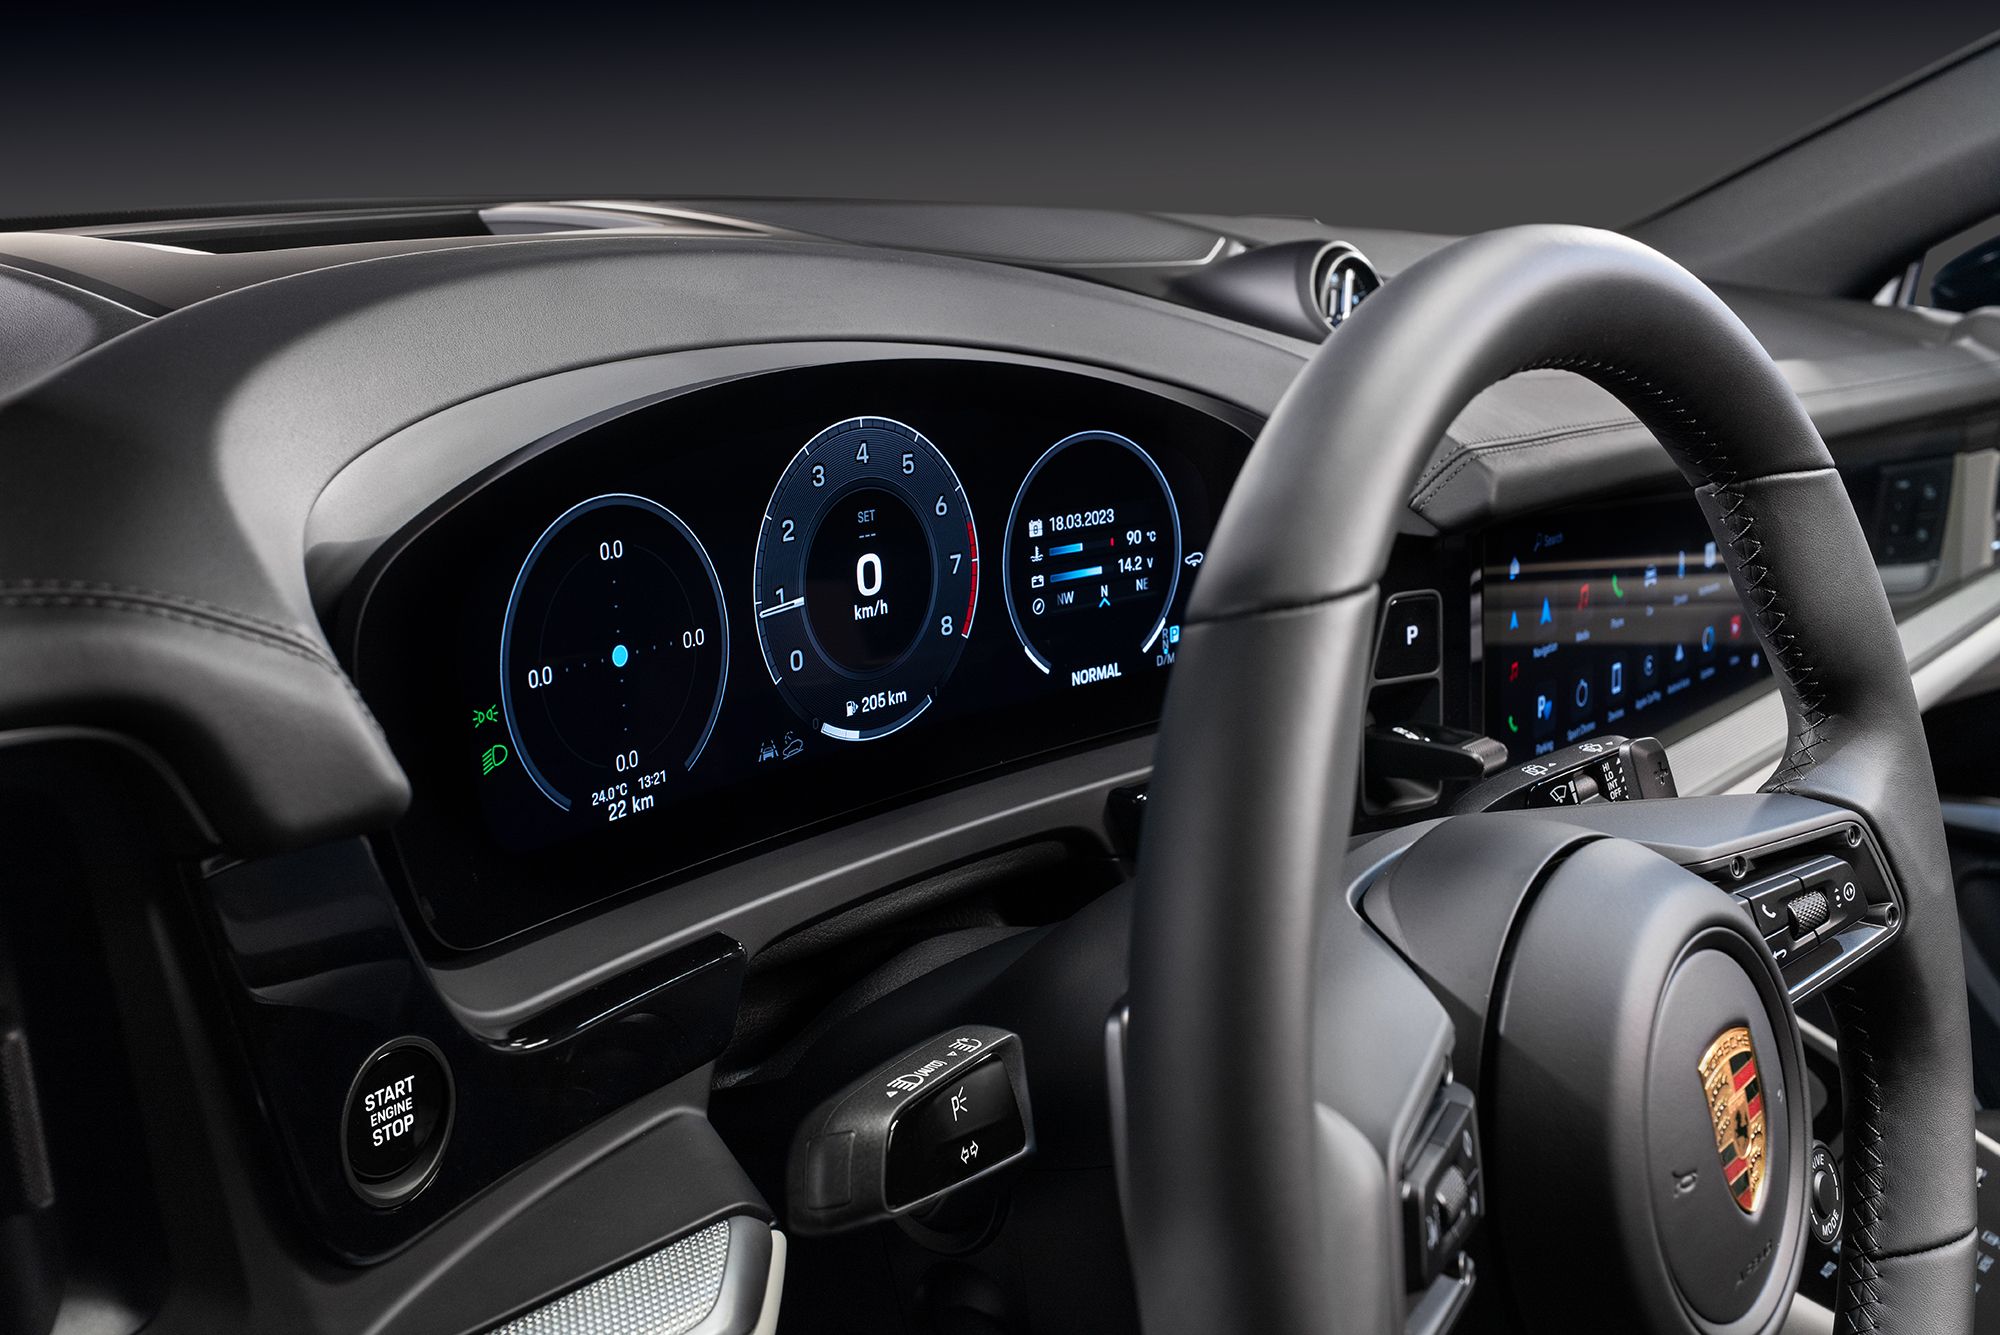 Is There a Future for the Tachometer?